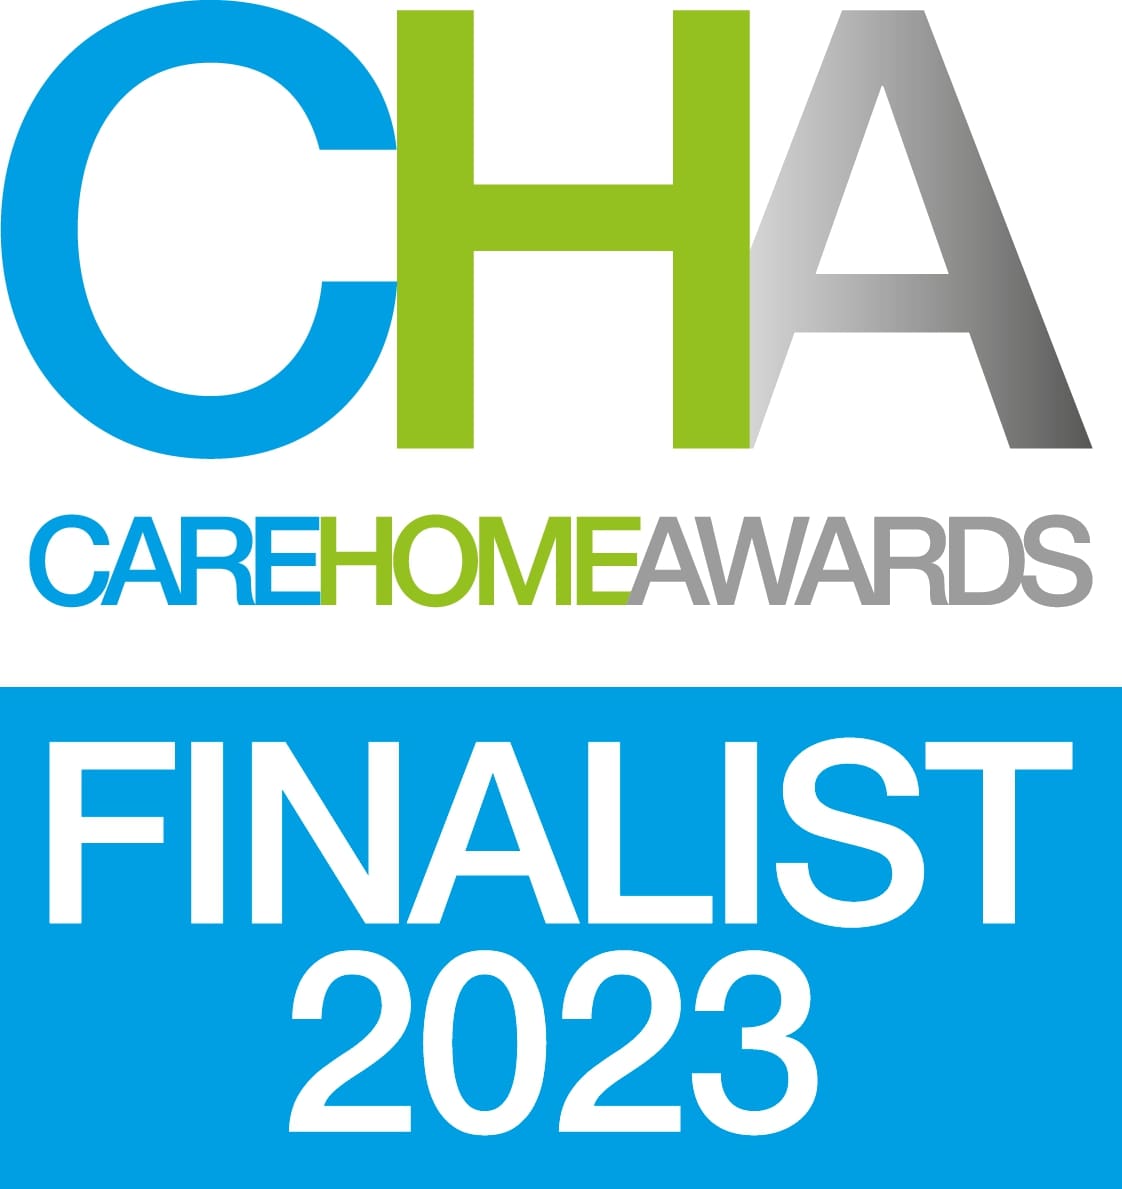 Care Home Awards 2023 Finalist - Best Facilities Management, Maintenance or Housekeeping Team